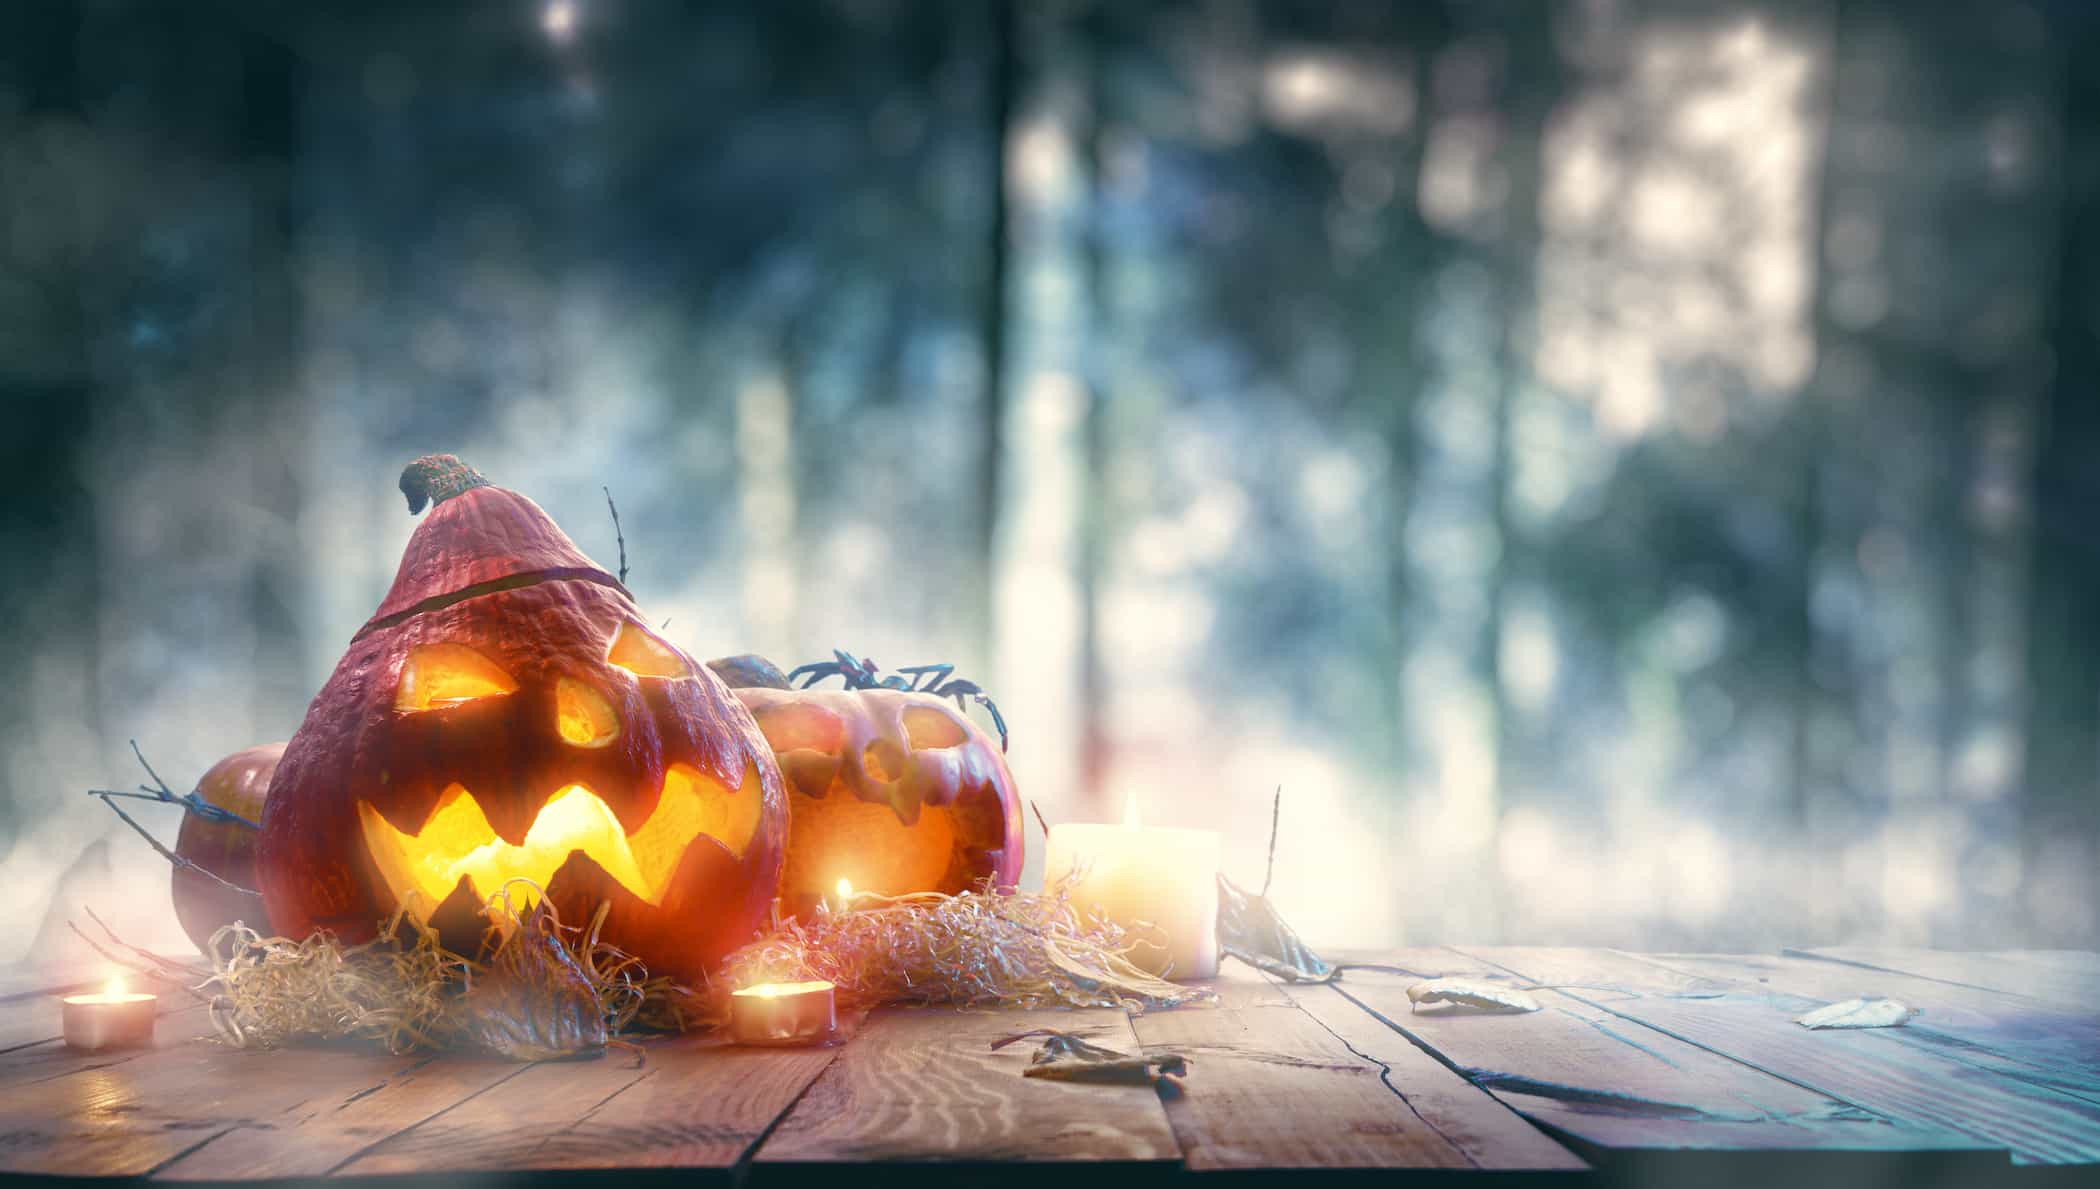 Will October be ‘spooky’ for the markets?